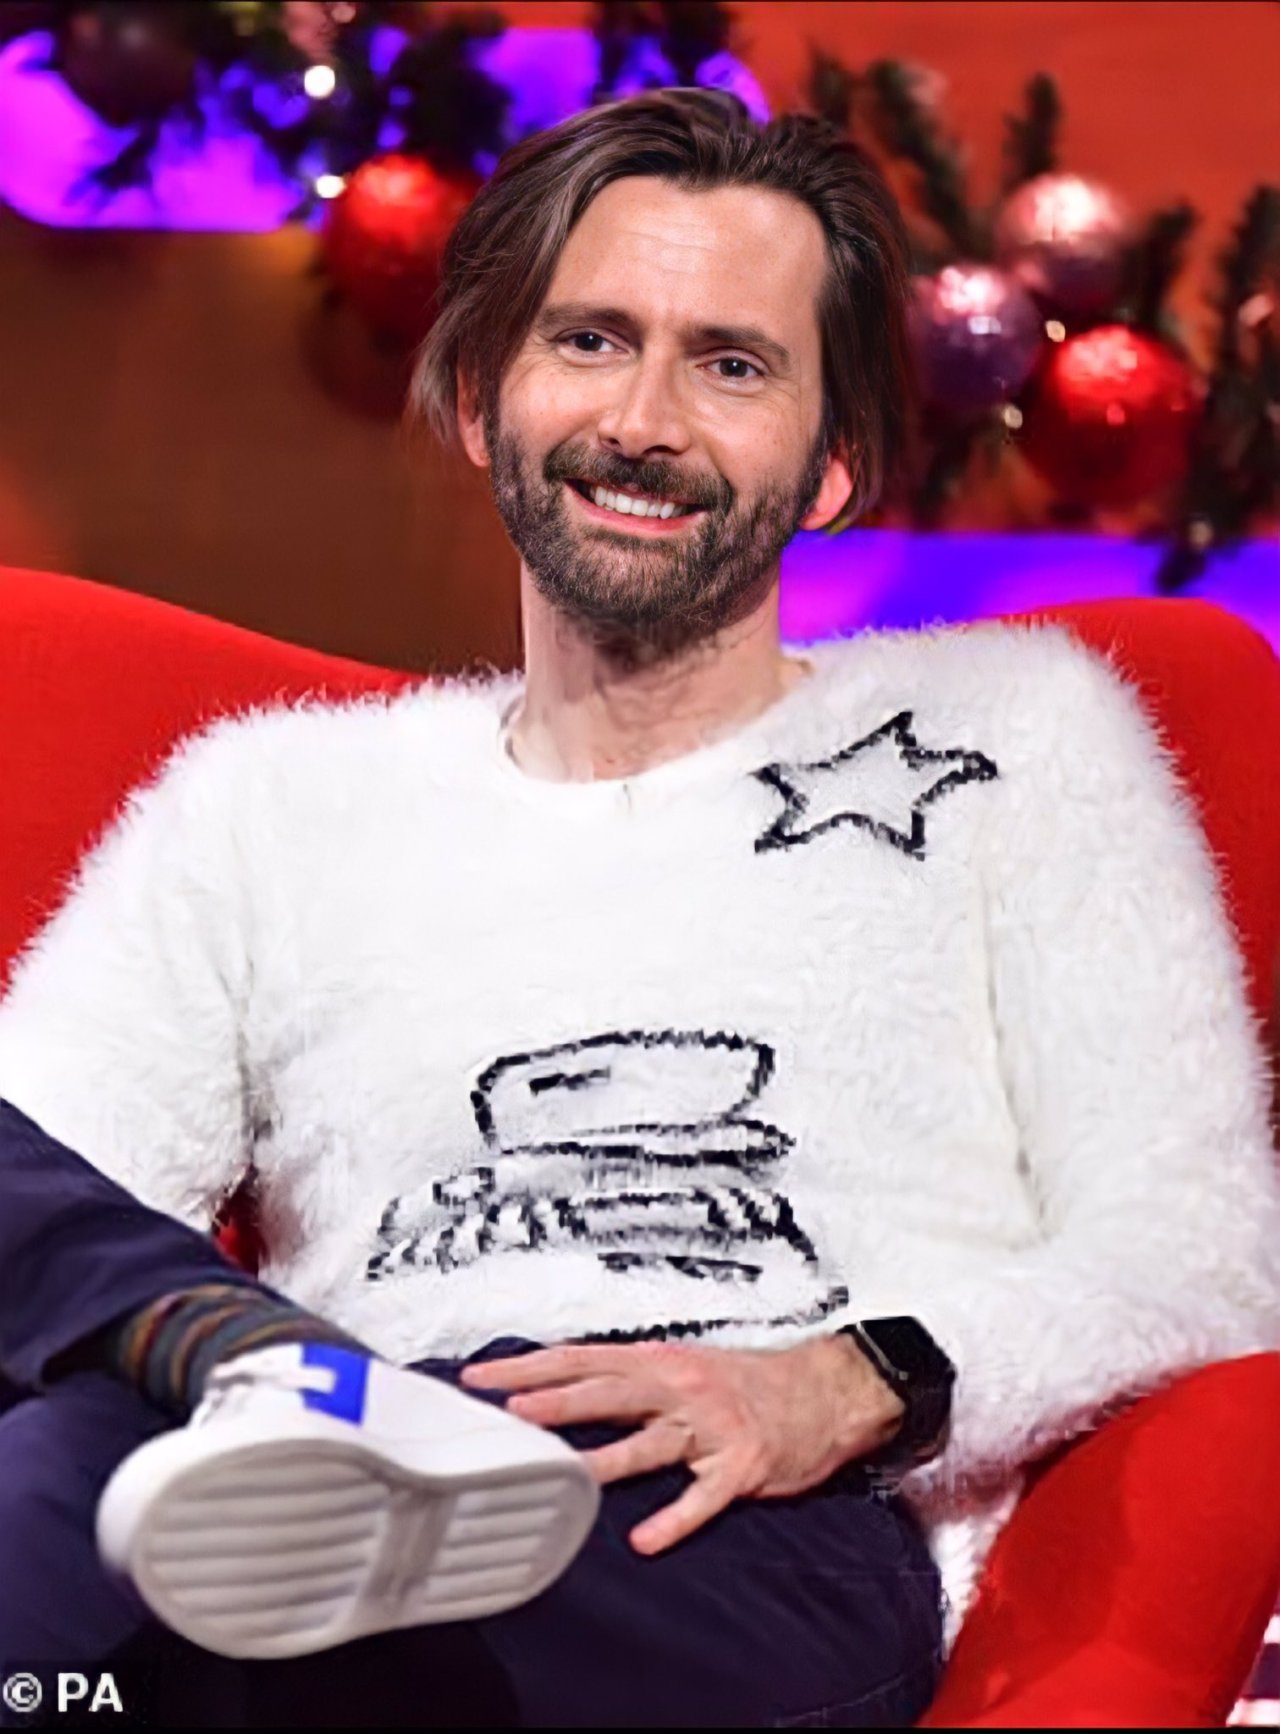 Promo photo of David Tennant from The Graham Norton Show - Friday 18th December 2020